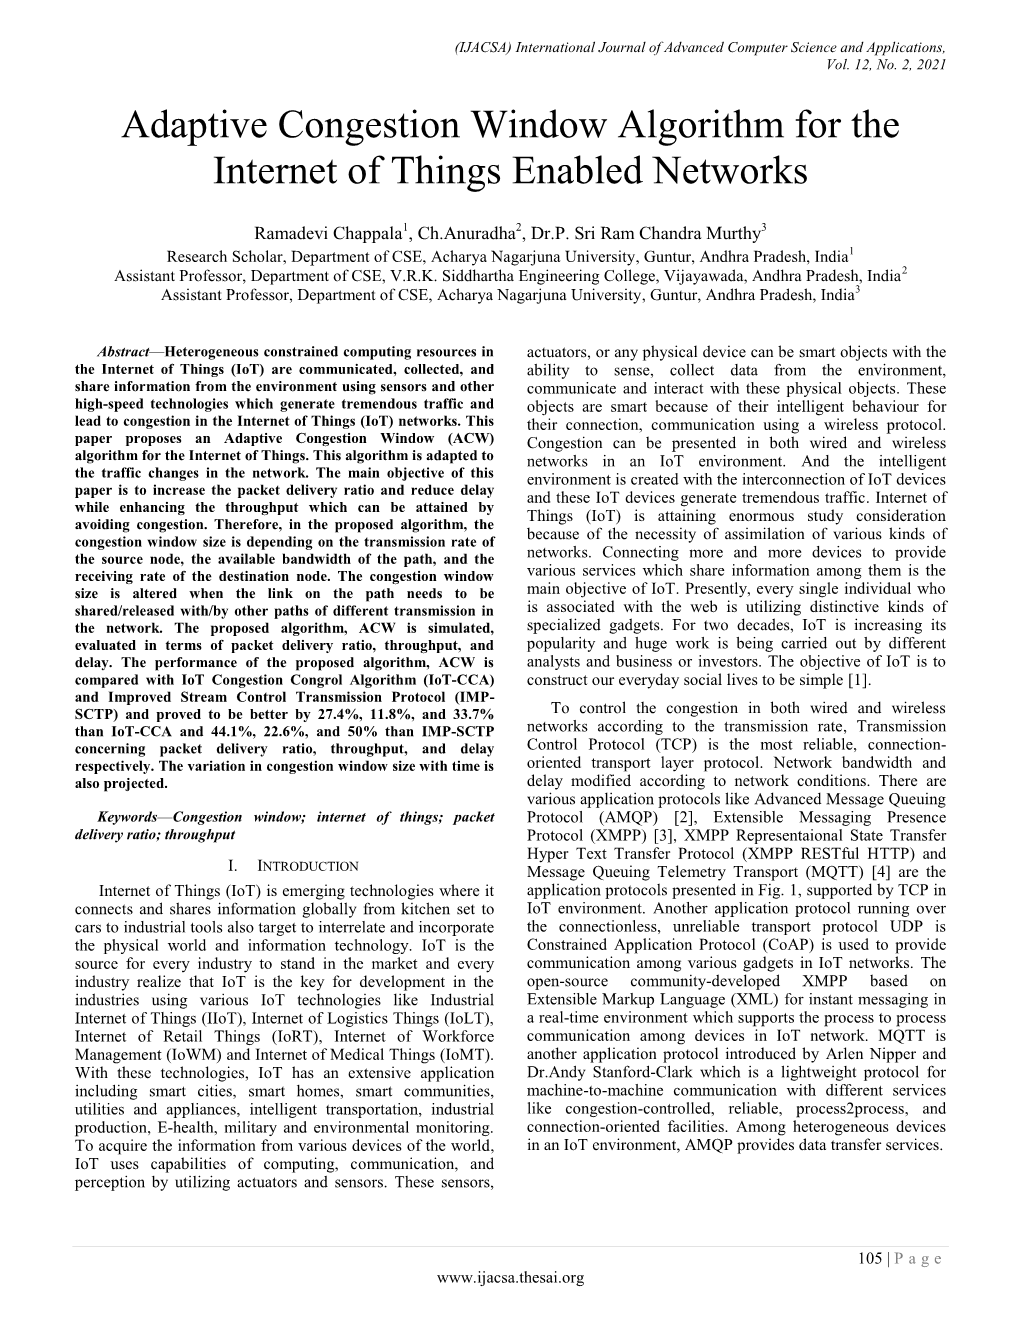 Adaptive Congestion Window Algorithm for the Internet of Things Enabled Networks